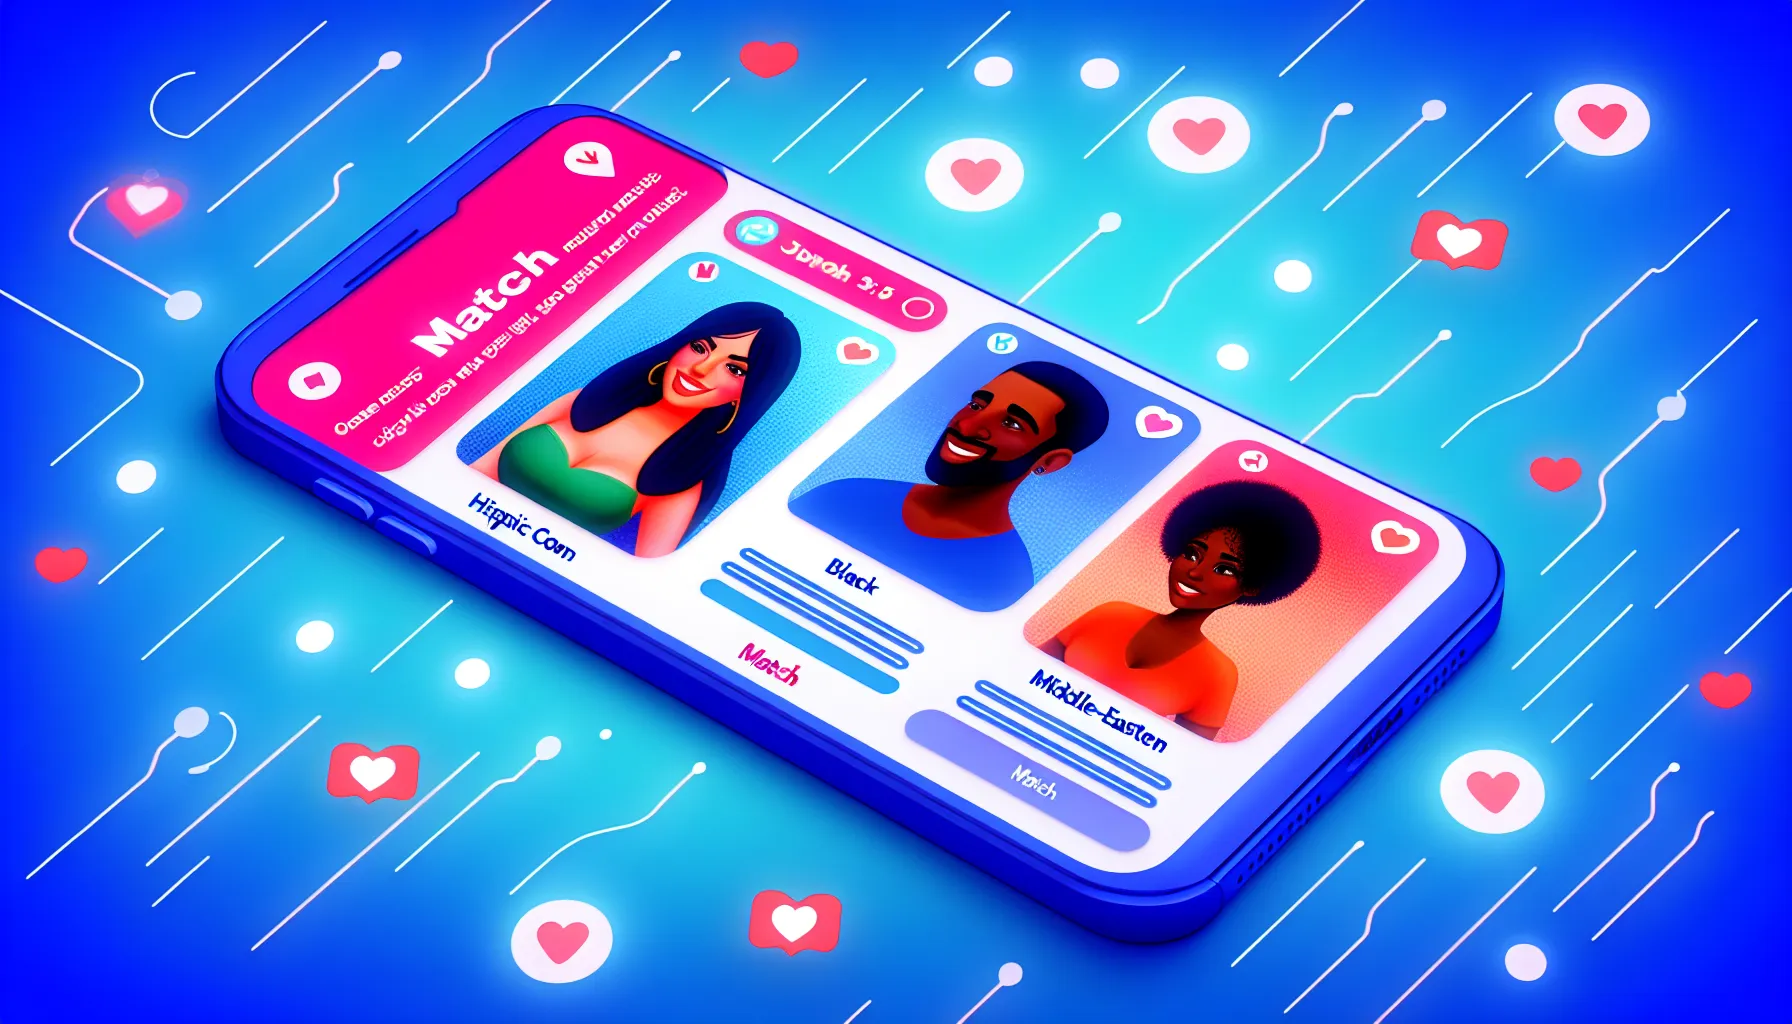 Dynamic dating app interface illustrating user profiles and match icons